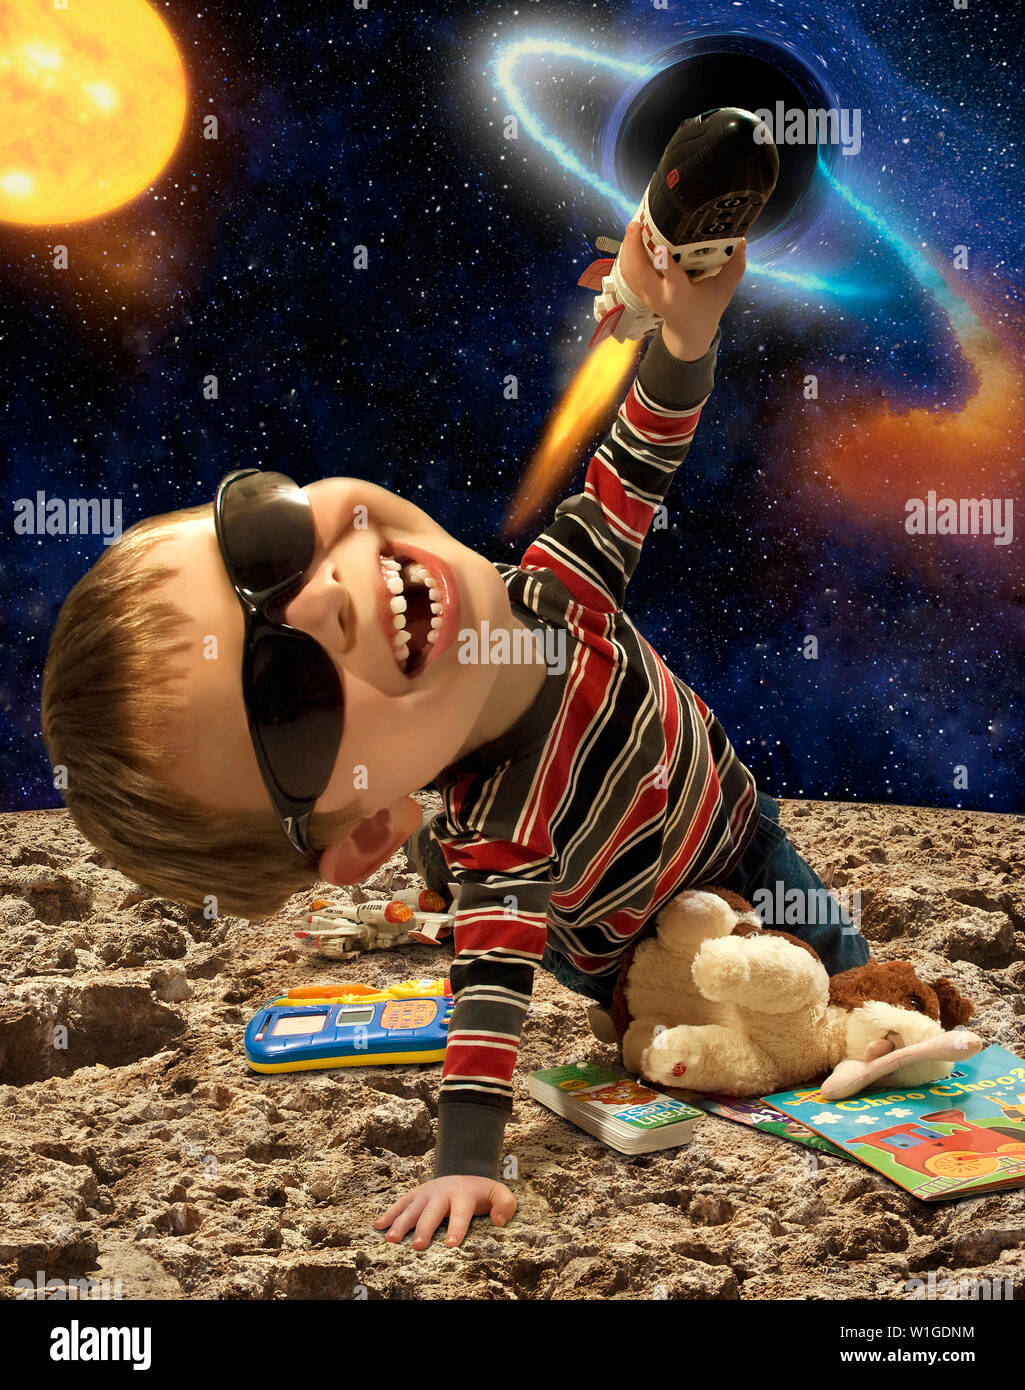 child with wild imagination playing with toys Stock Photo